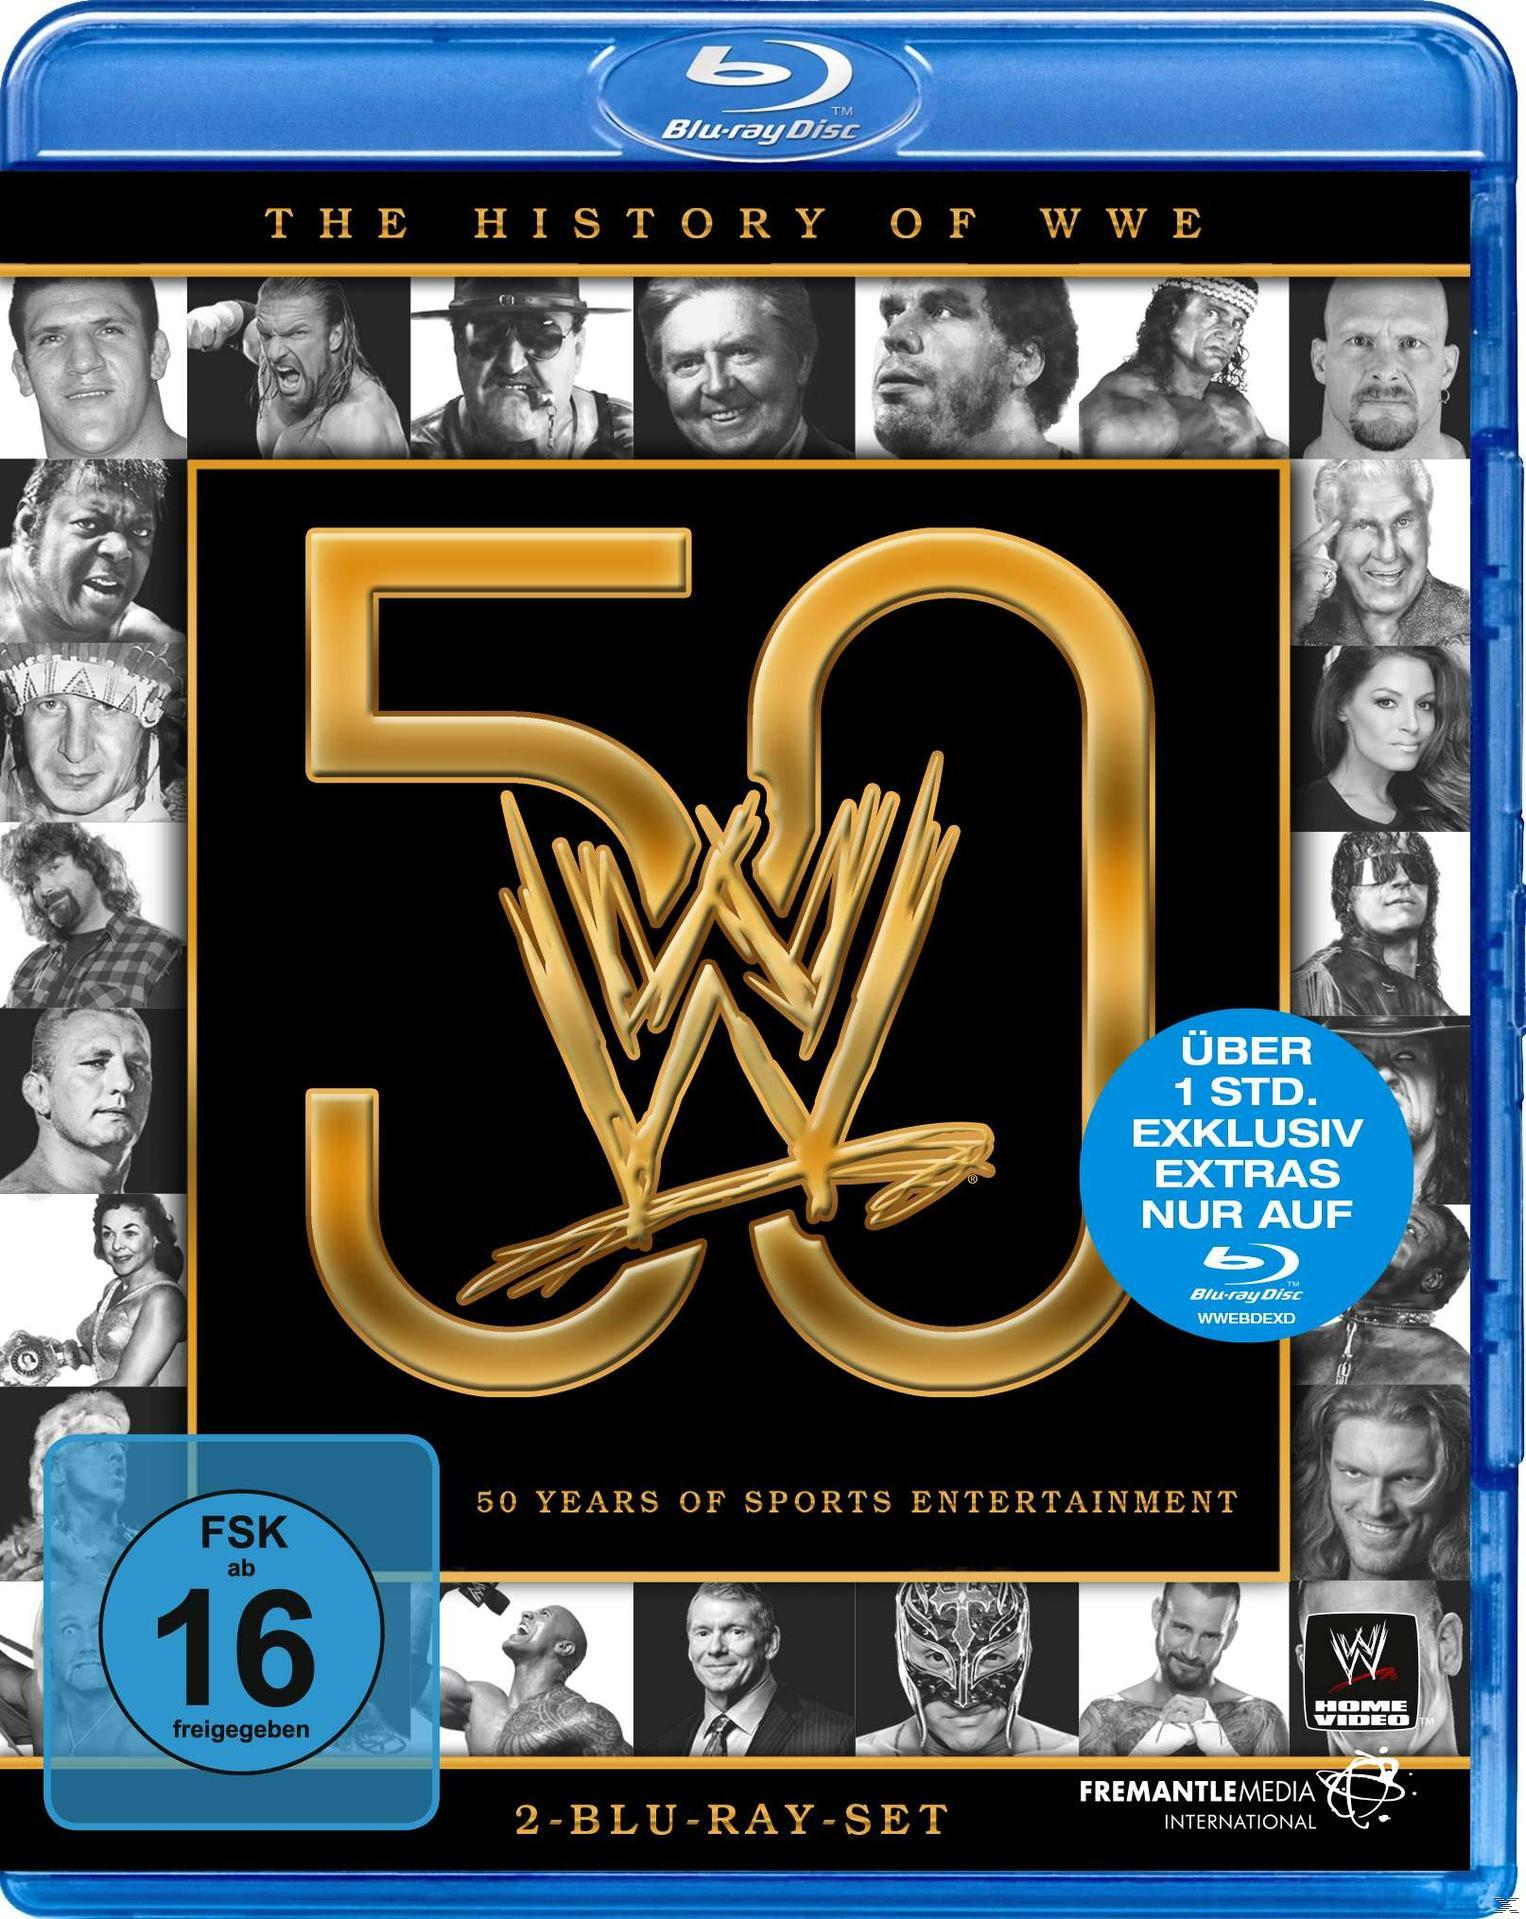 The History of Blu-ray WWE: sports entertainment years 50 of